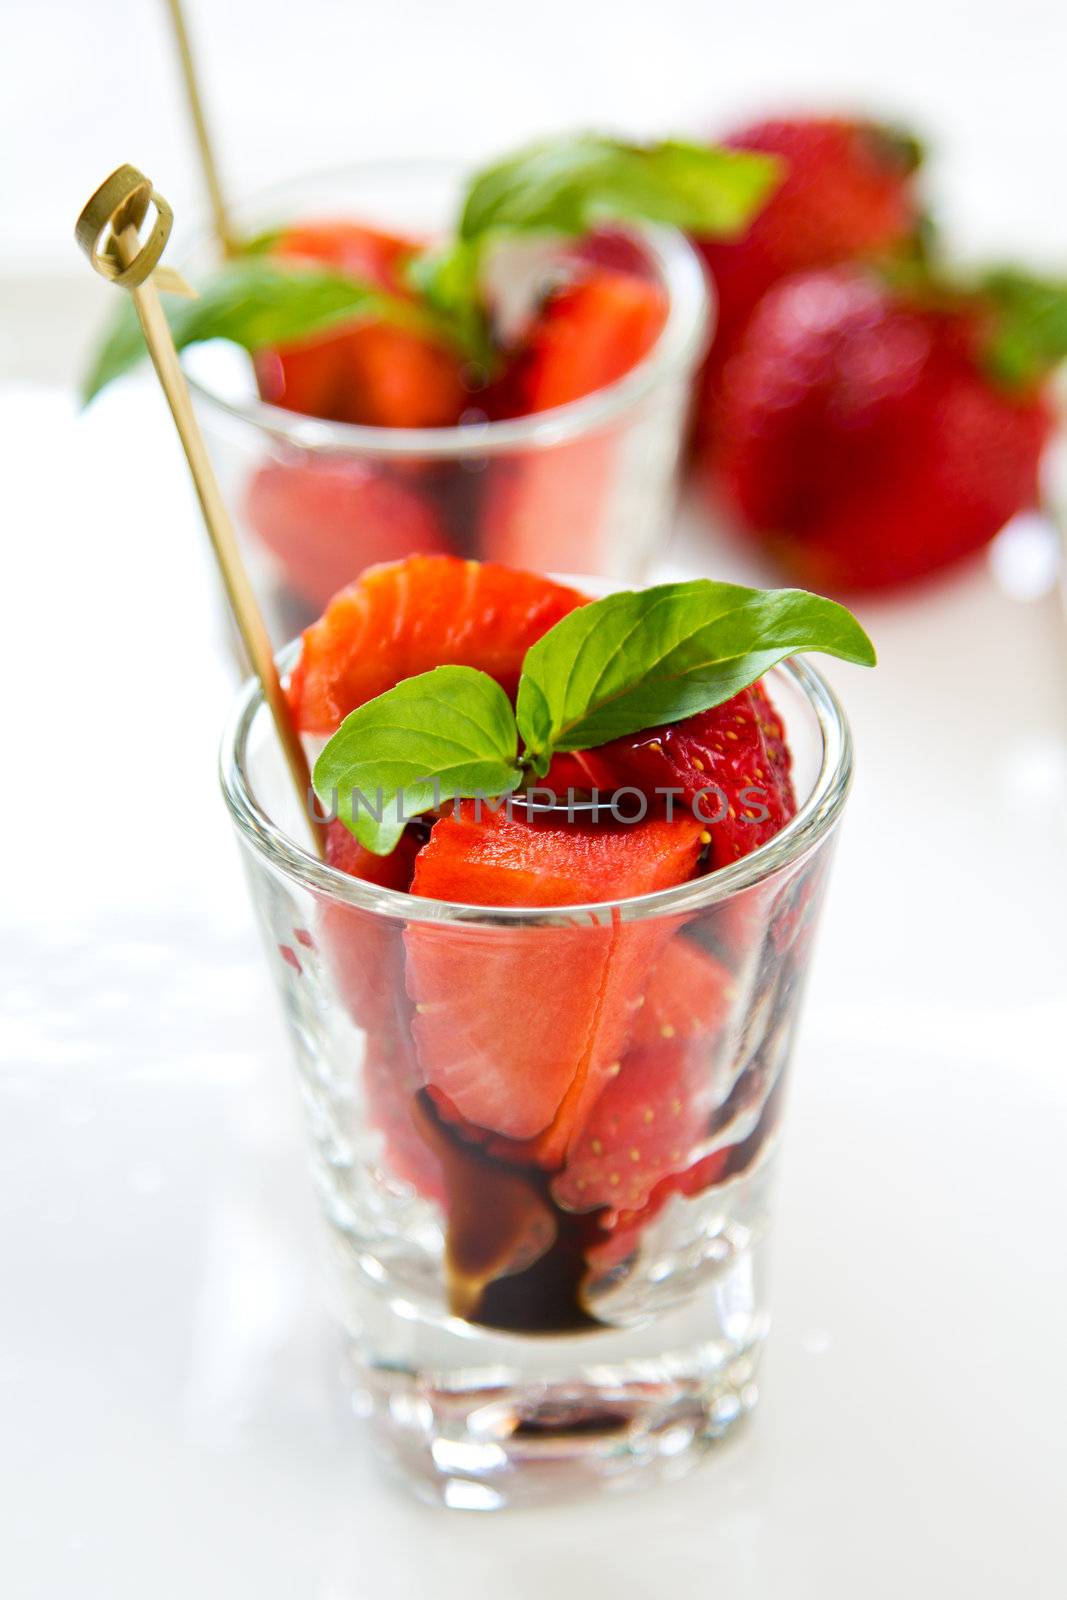 Strawberry with Balsamic sauce by vanillaechoes